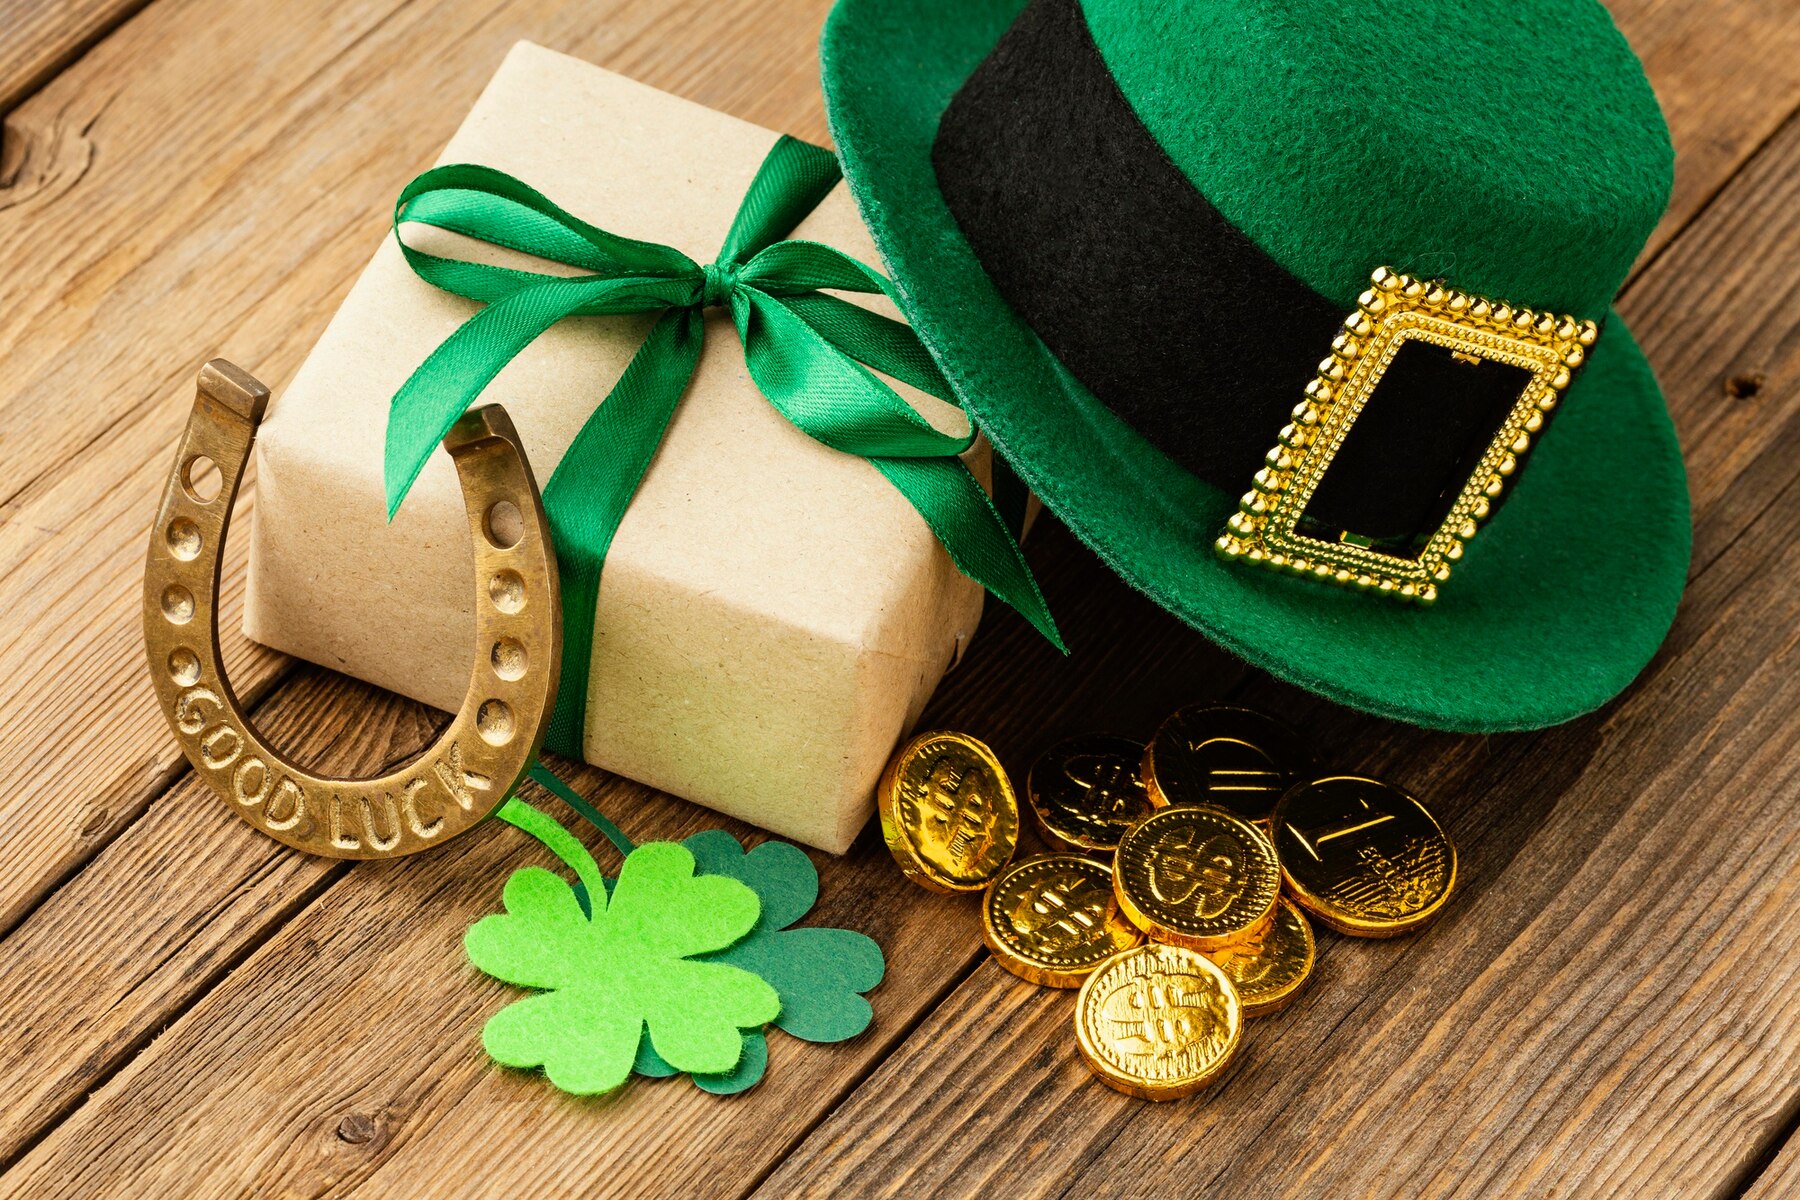 St Patrick's Day Gift Basket Ideas For Her